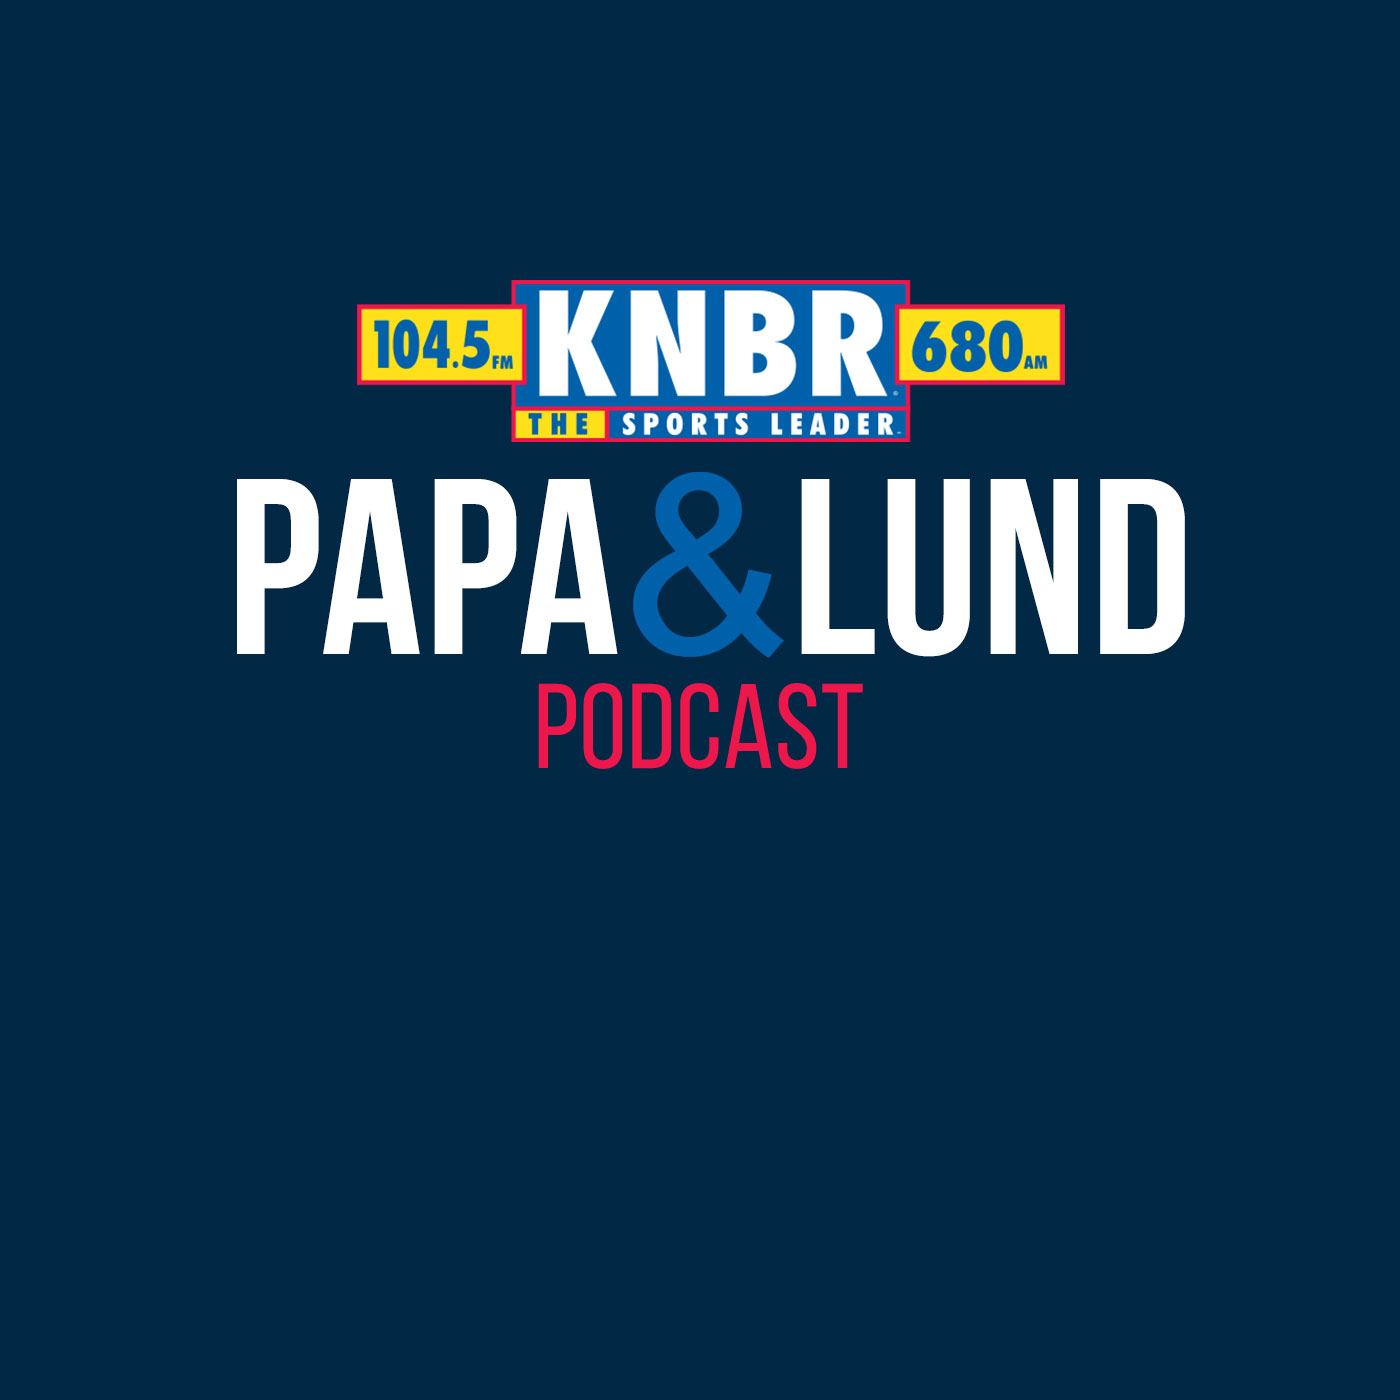 6-10 Andrew Baggarly joins Papa & Lund to discuss the recent rough patch for the Giants on the defensive side of the ball ahead of a huge series against the Dodgers